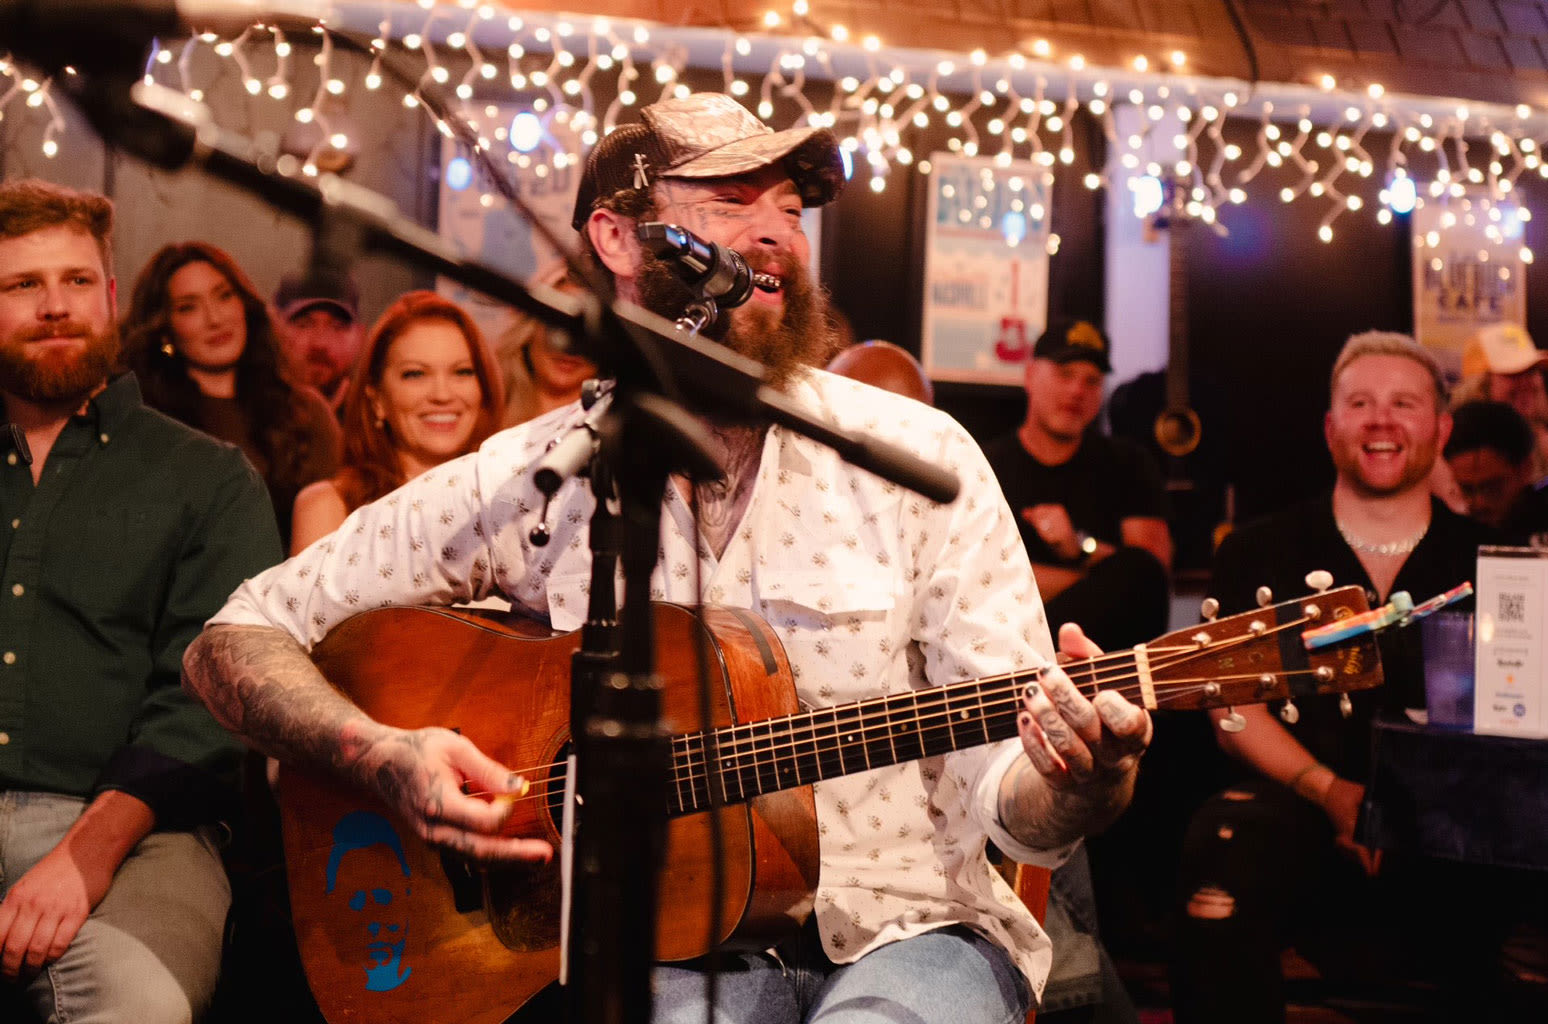 Post Malone, Lainey Wilson, Ashley Gorley & Ernest Highlight Power of Songwriting at Bluebird Cafe Show